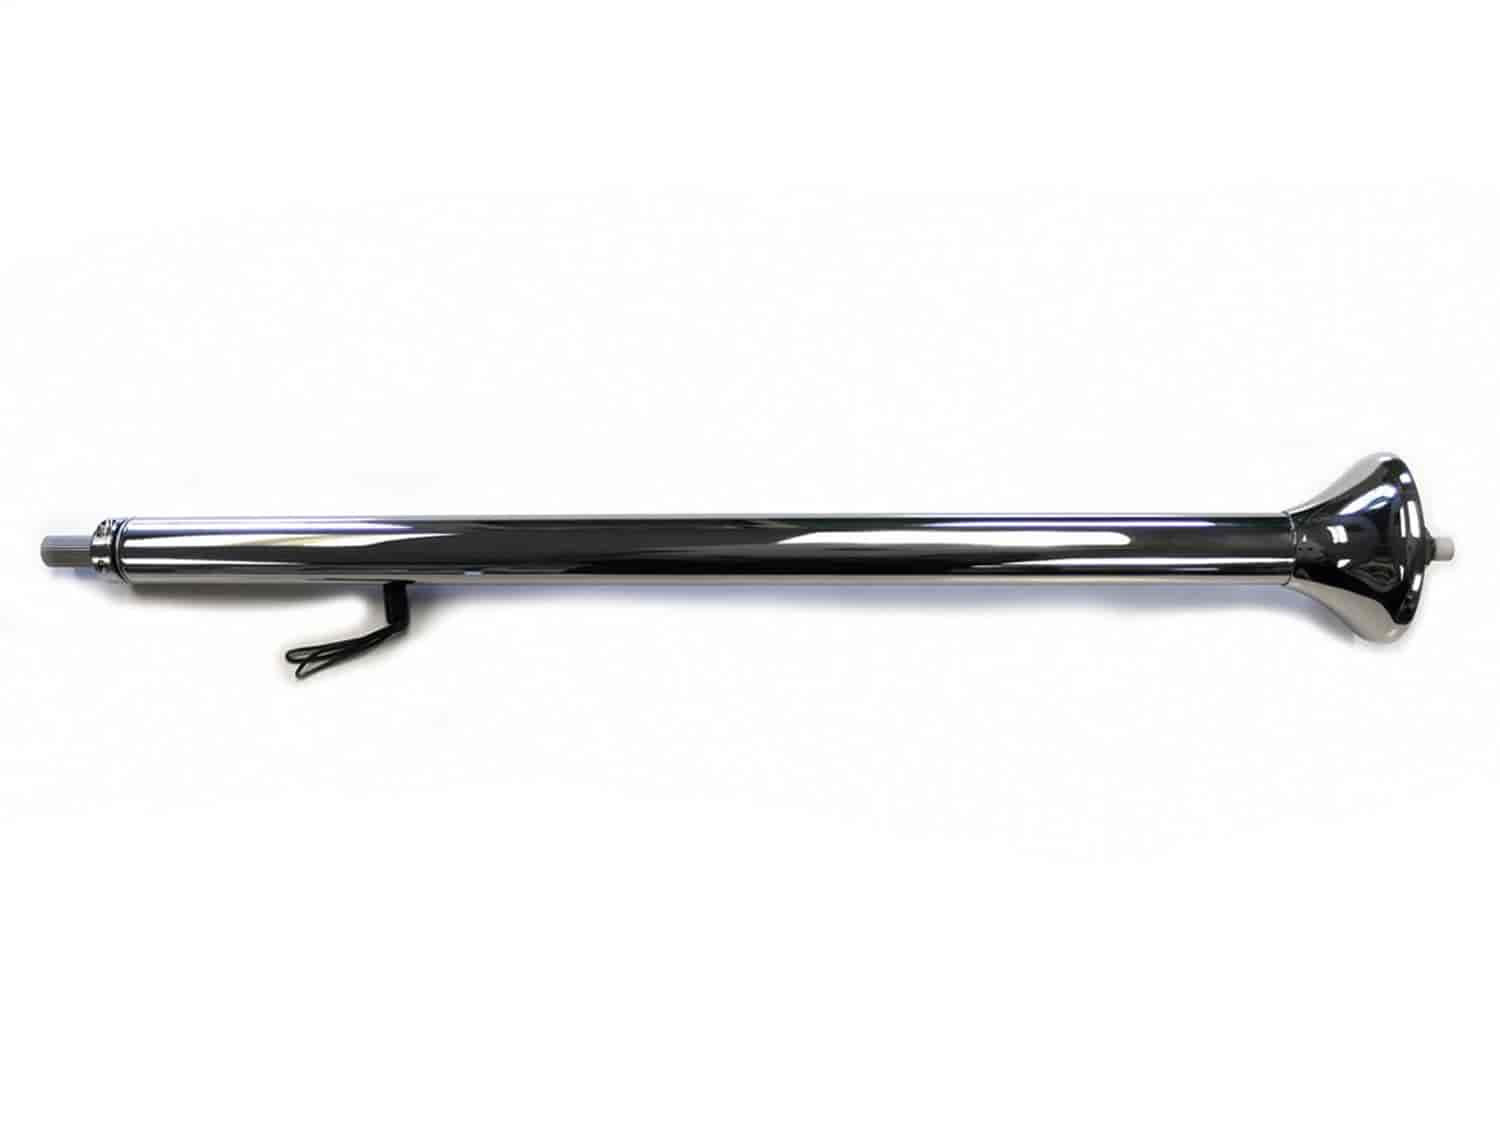 Forty-Series Steering Column 30 in. Length, Polished